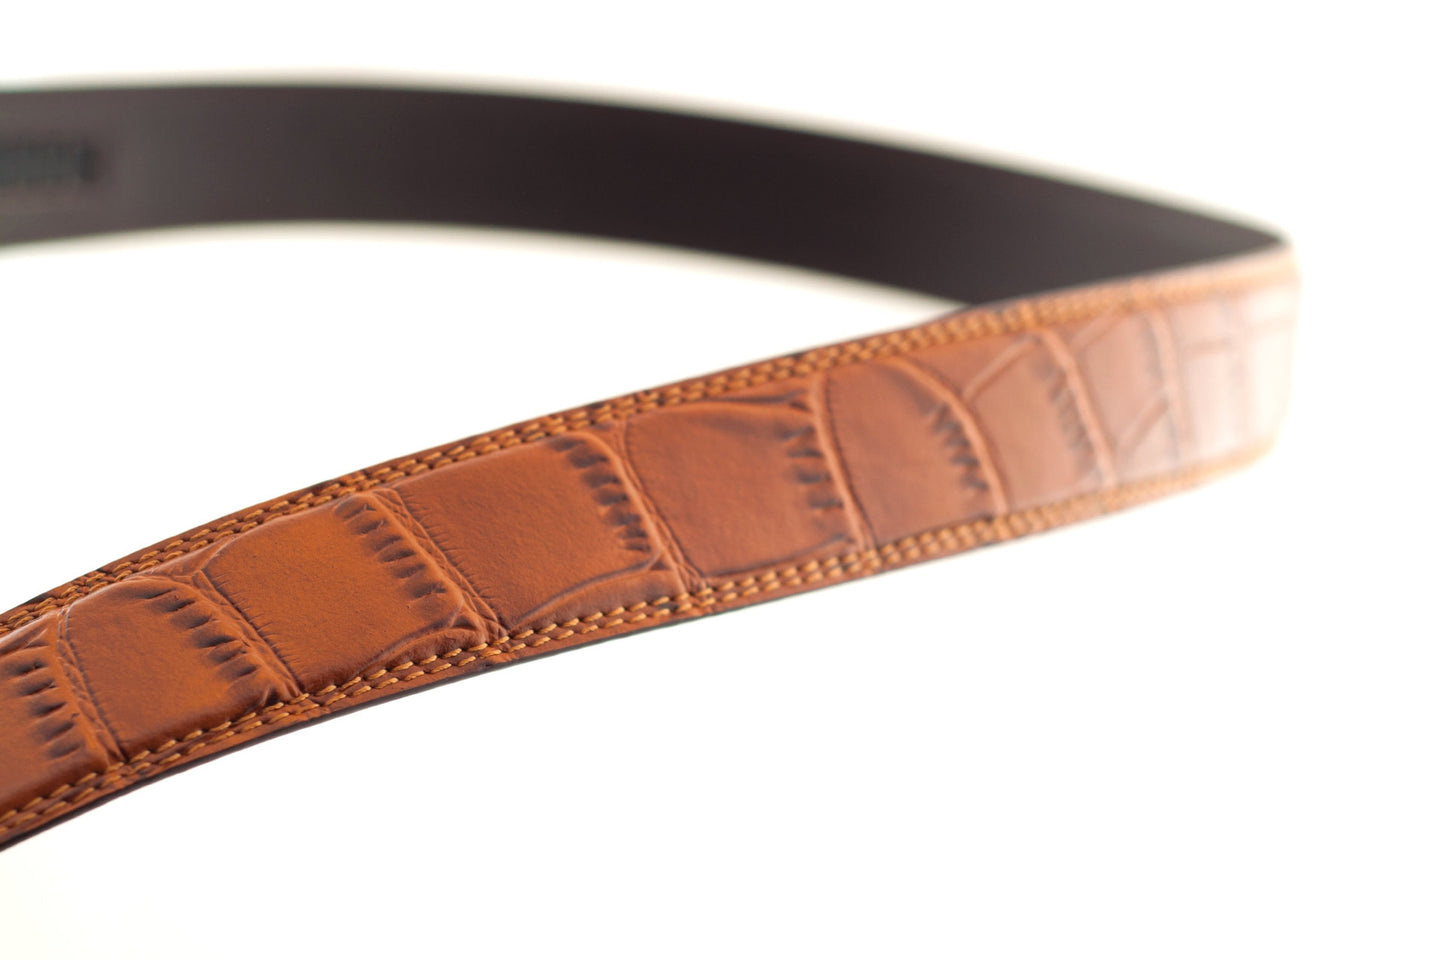 Men's faux croc belt strap in light brown with a 1.25-inch width, formal look, texture and stitching